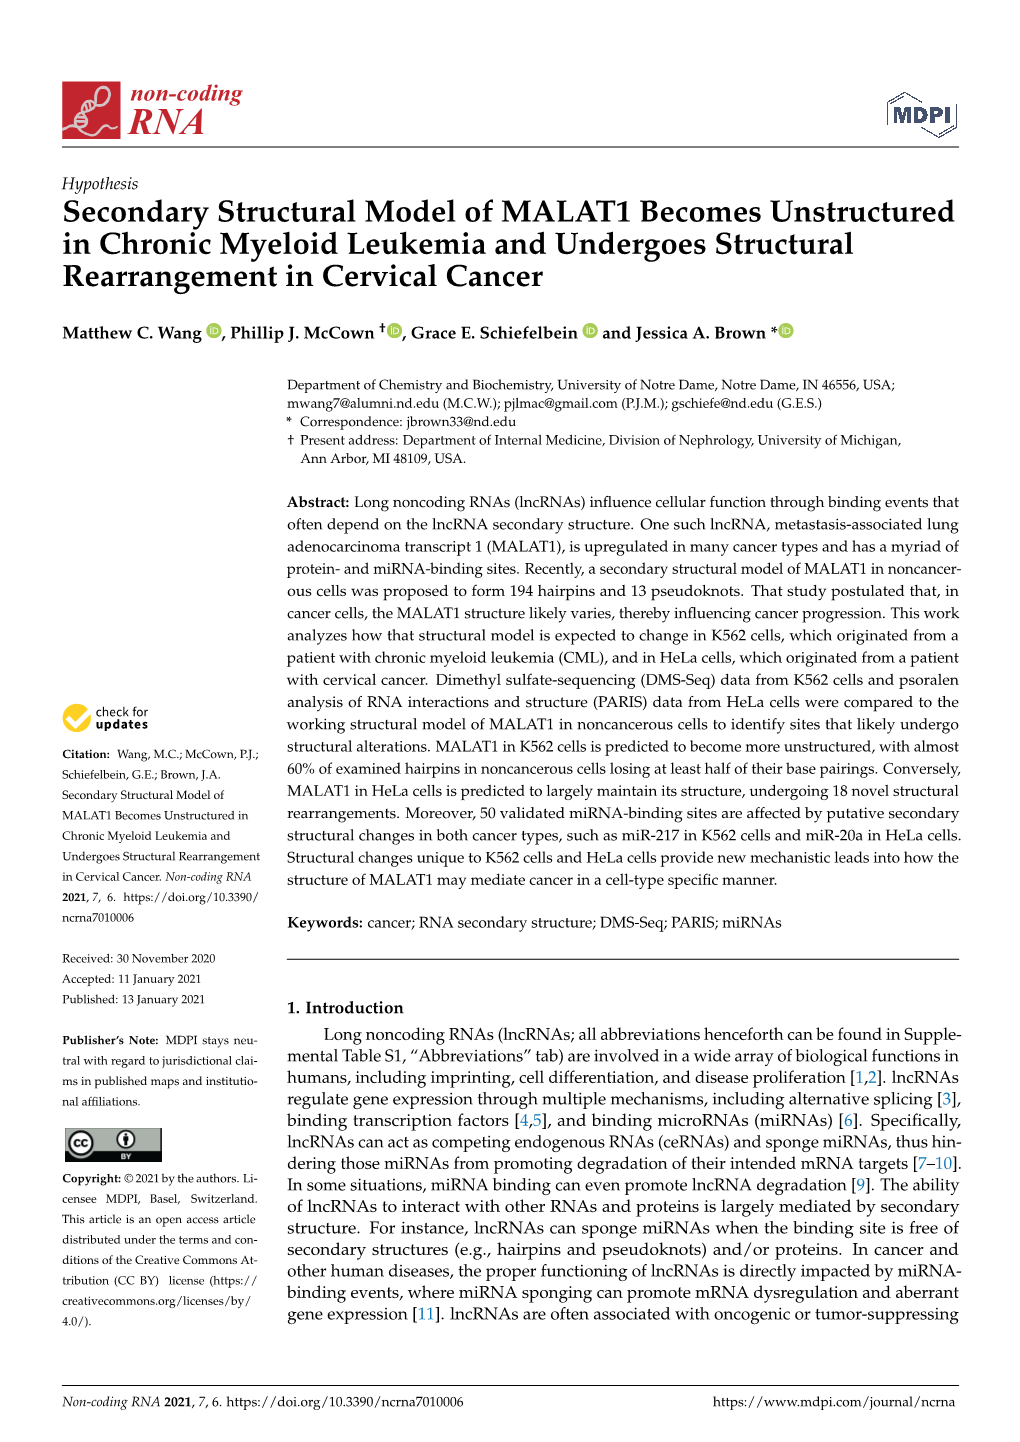 Secondary Structural Model of MALAT1 Becomes Unstructured in Chronic Myeloid Leukemia and Undergoes Structural Rearrangement in Cervical Cancer